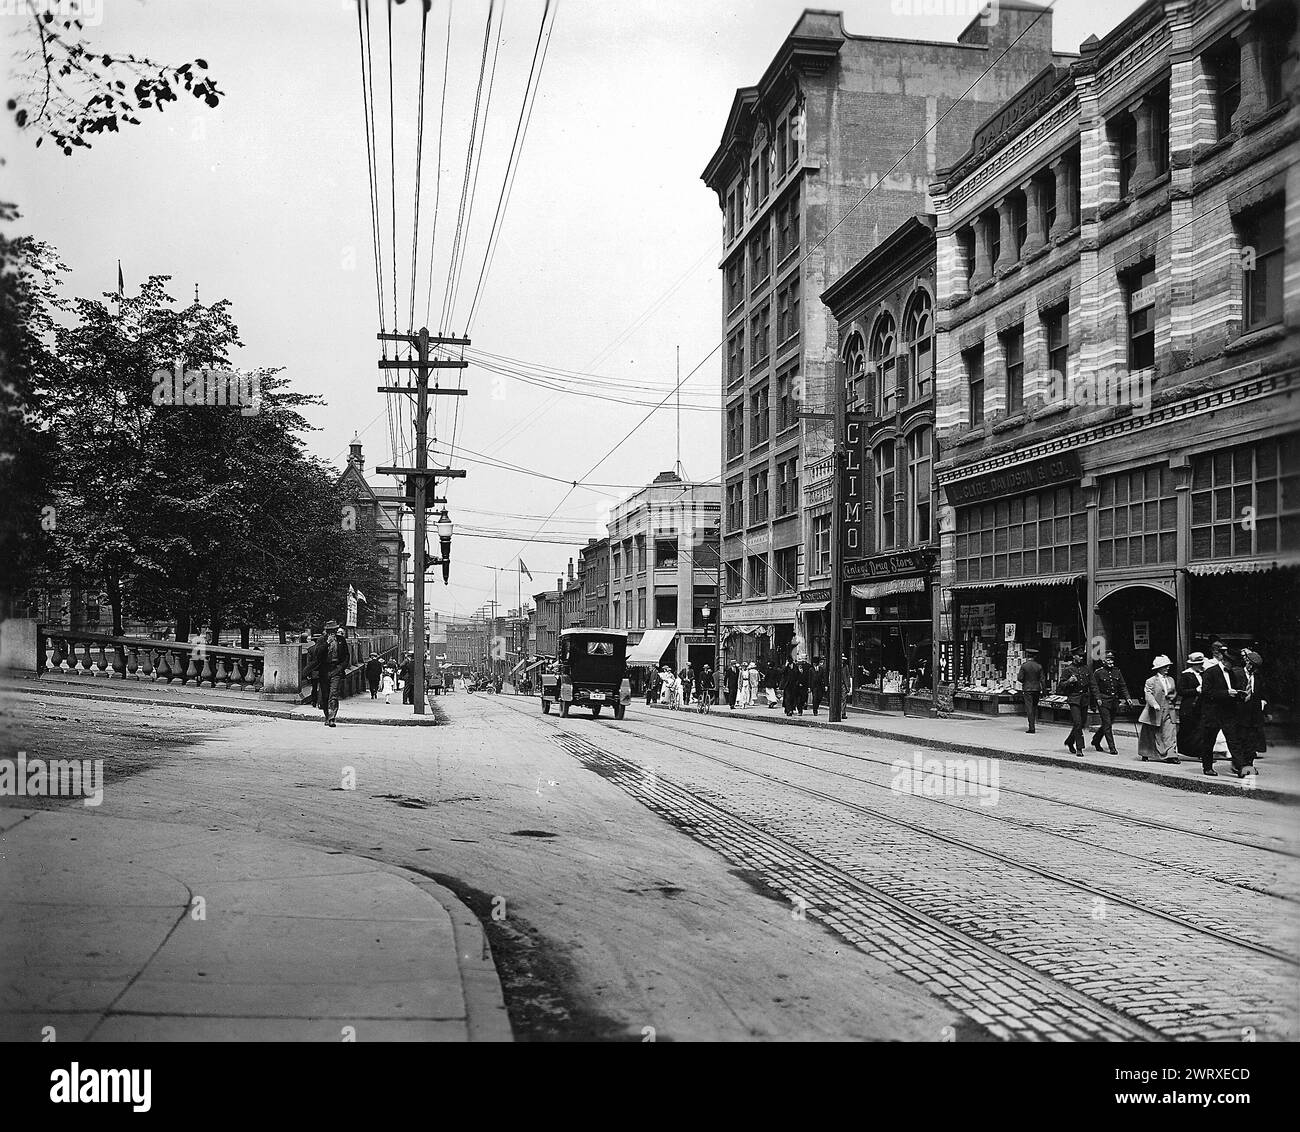 Vintage Street Photography of downtown Halifax Nova Scotia, Canada.  Barrington Street, 1915.  With car driving down cobbled stone on this commercial street.  photo by Wm. Notman & Son Stock Photo